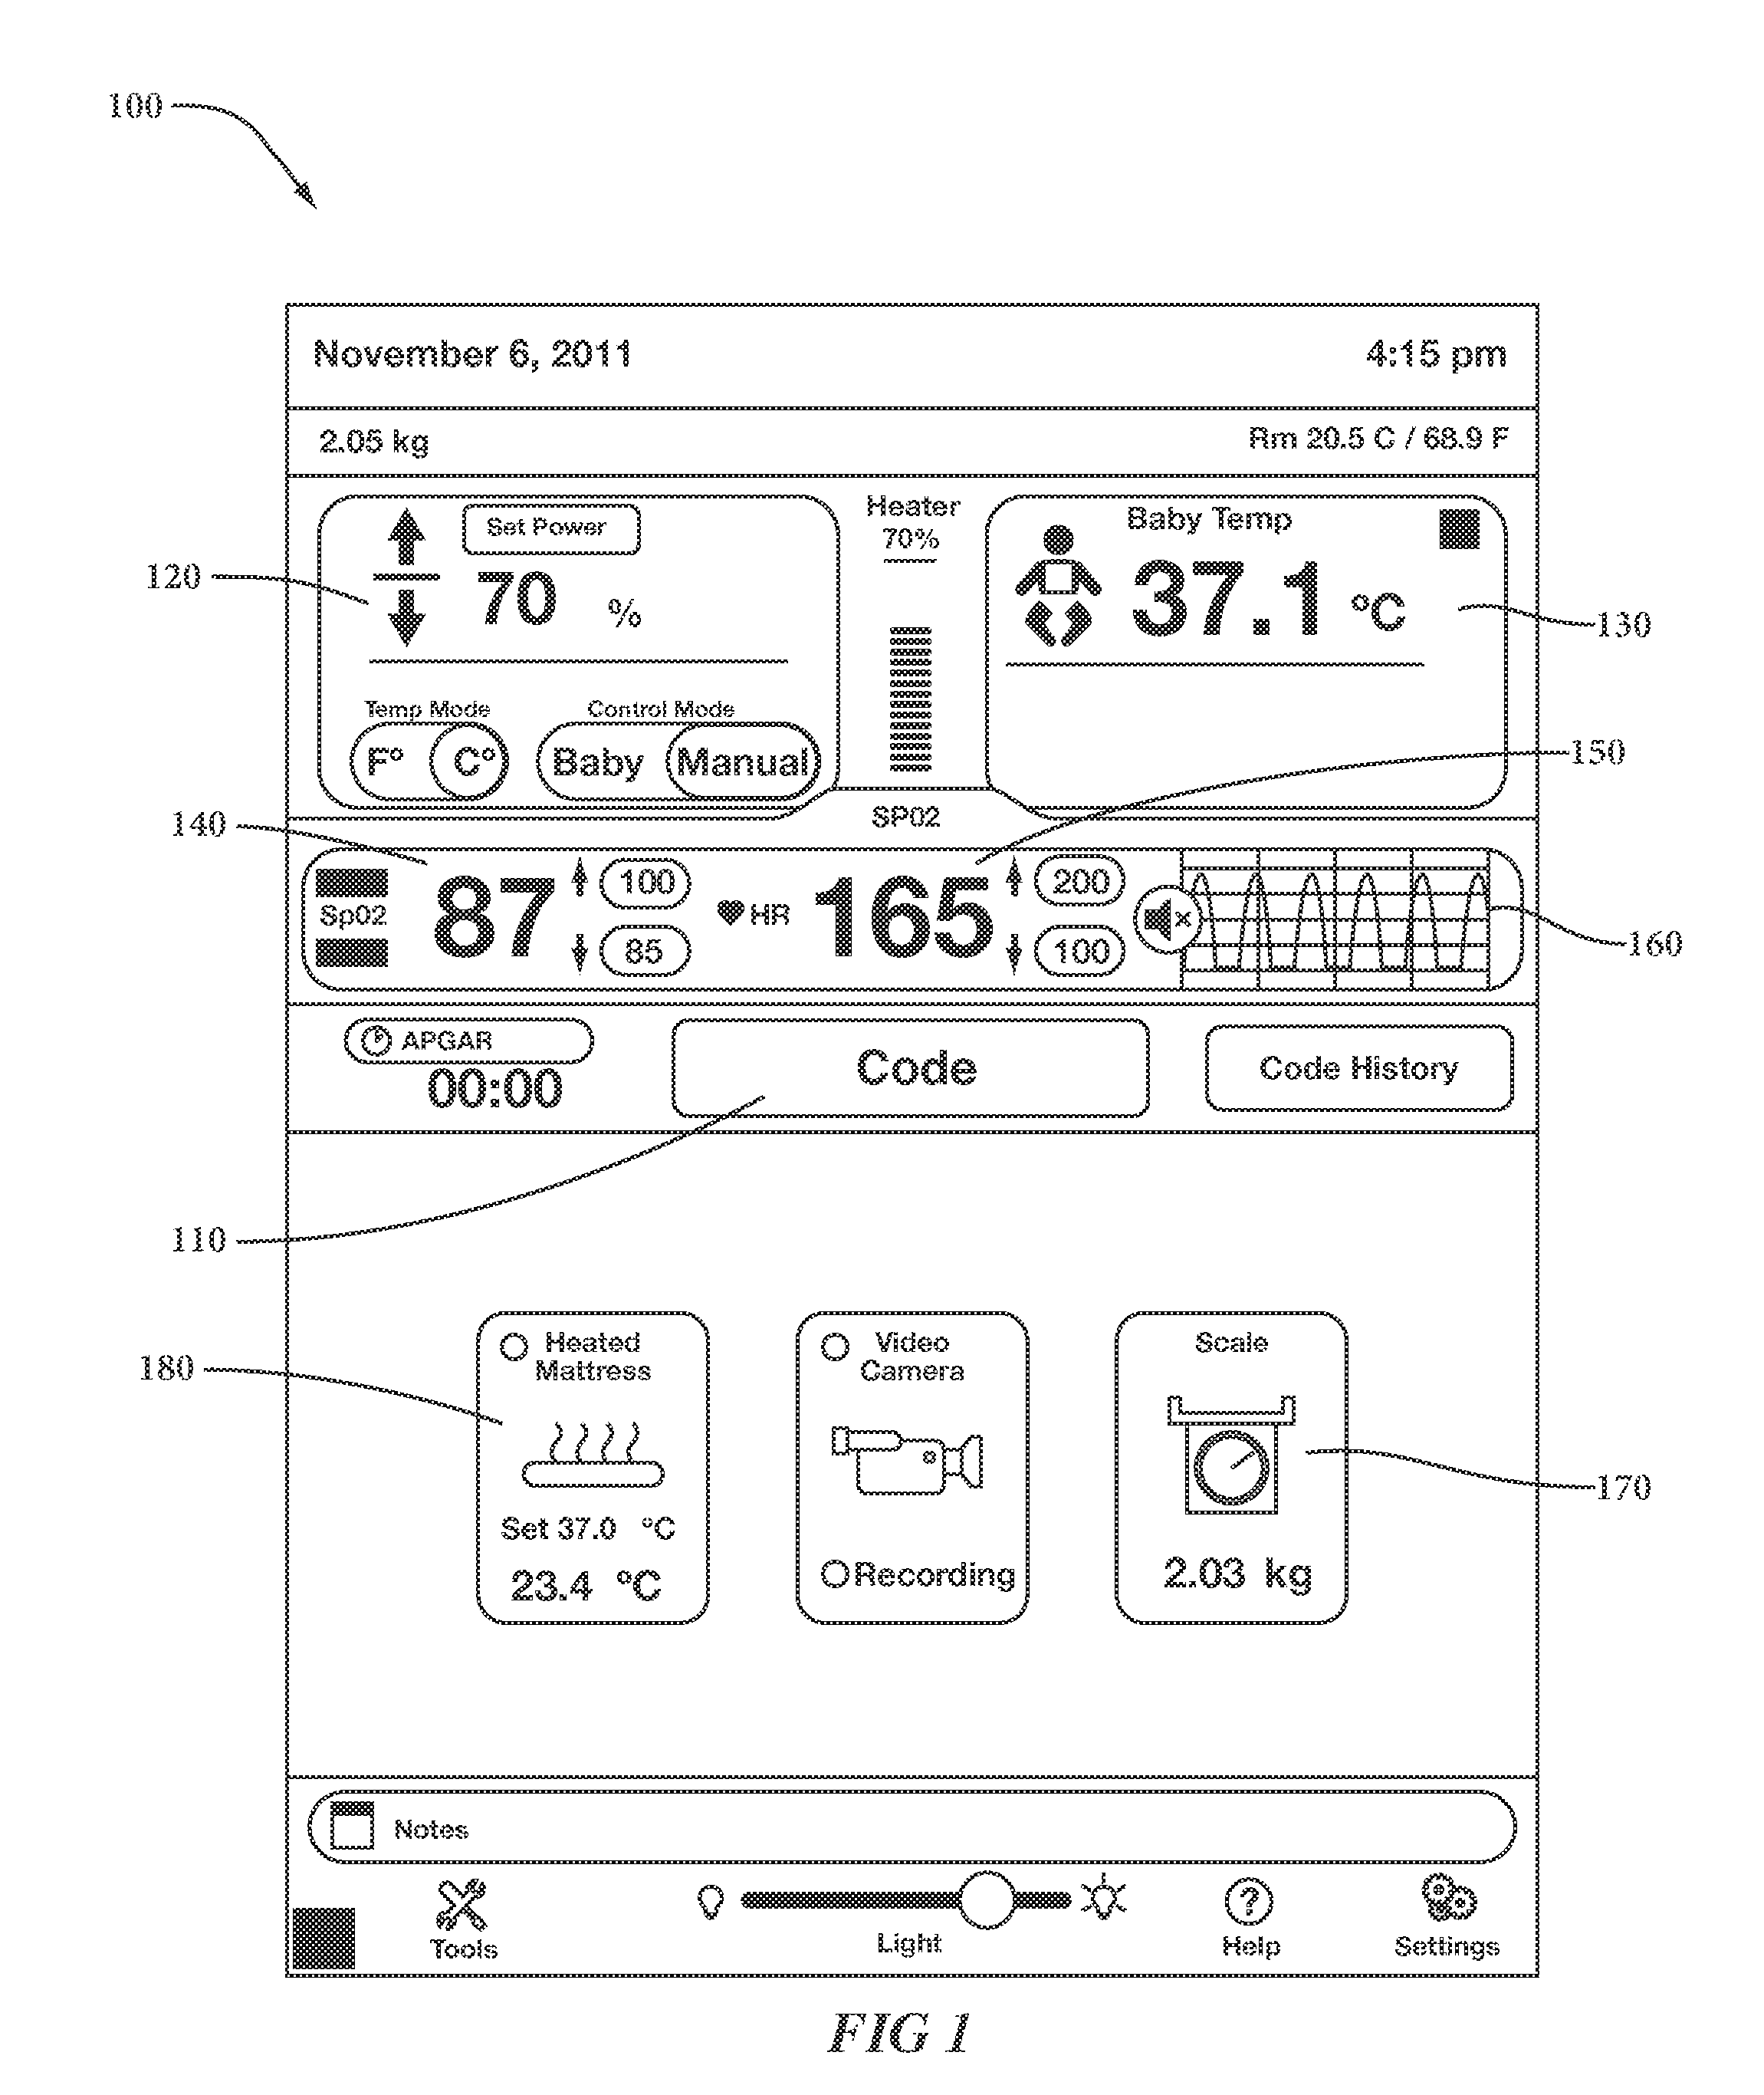 Code Support Device for Infant Care Devices